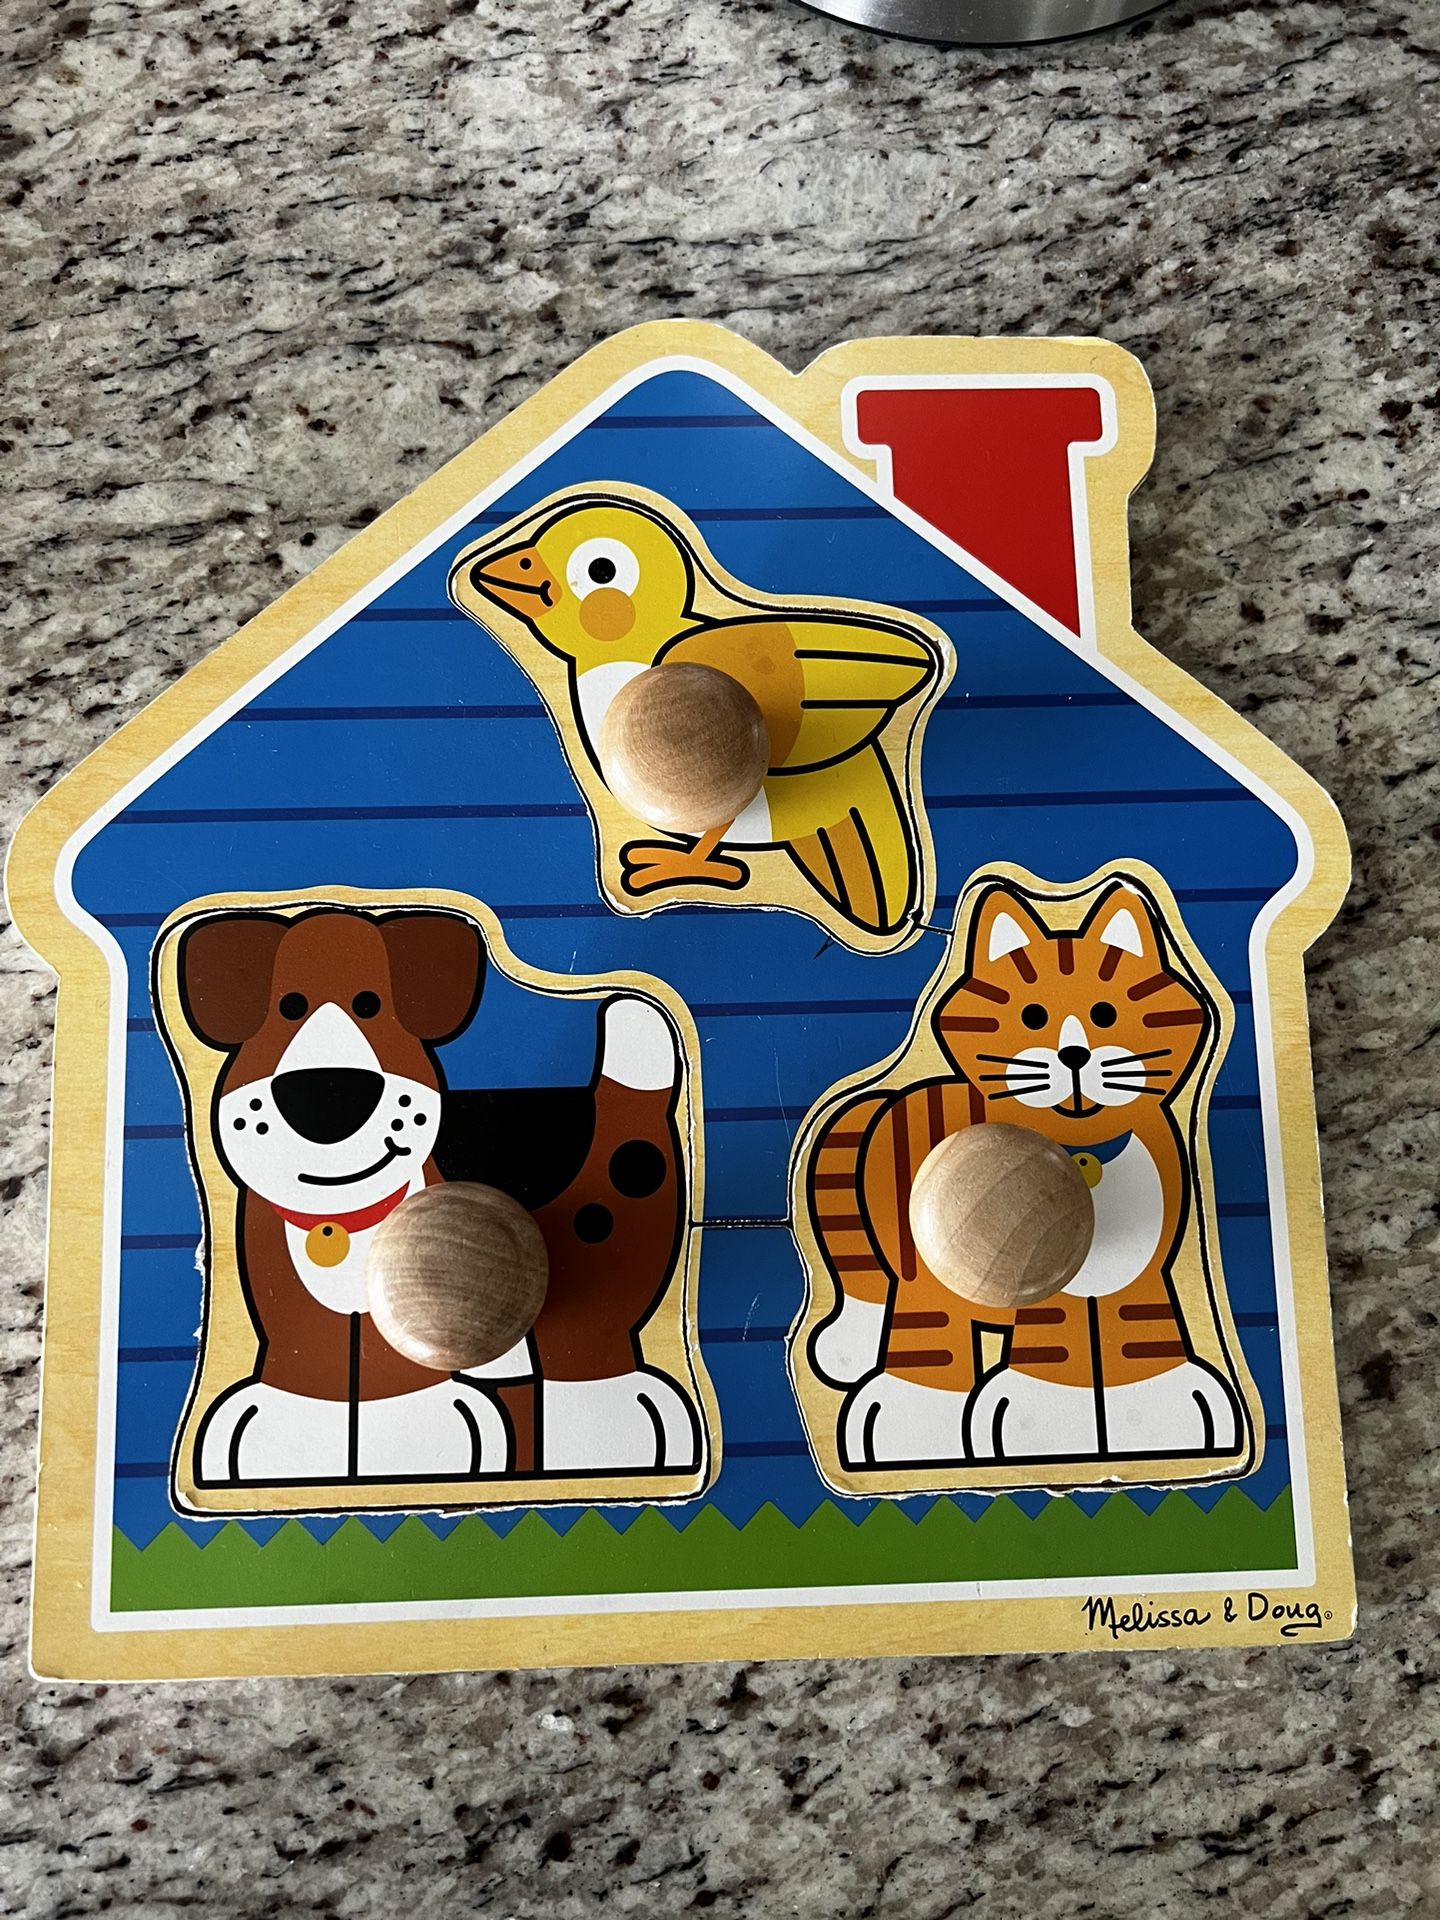 3 Puzzles Melissa & Doug And 2 Chuckle and Roar